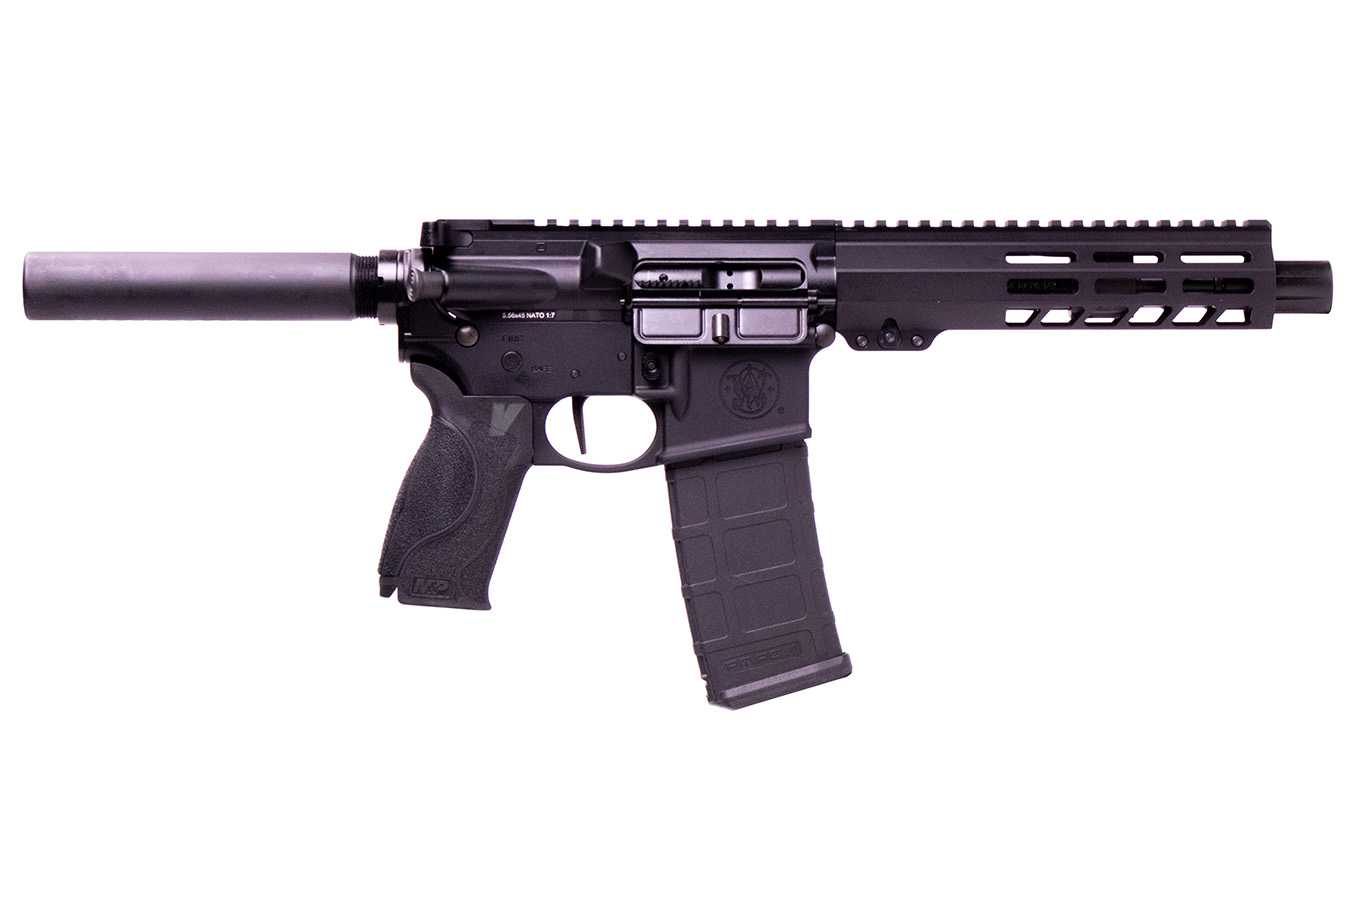 No. 9 Best Selling: SMITH AND WESSON MP15 5.56MM AR PISTOL WITH FLAT TRIGGER